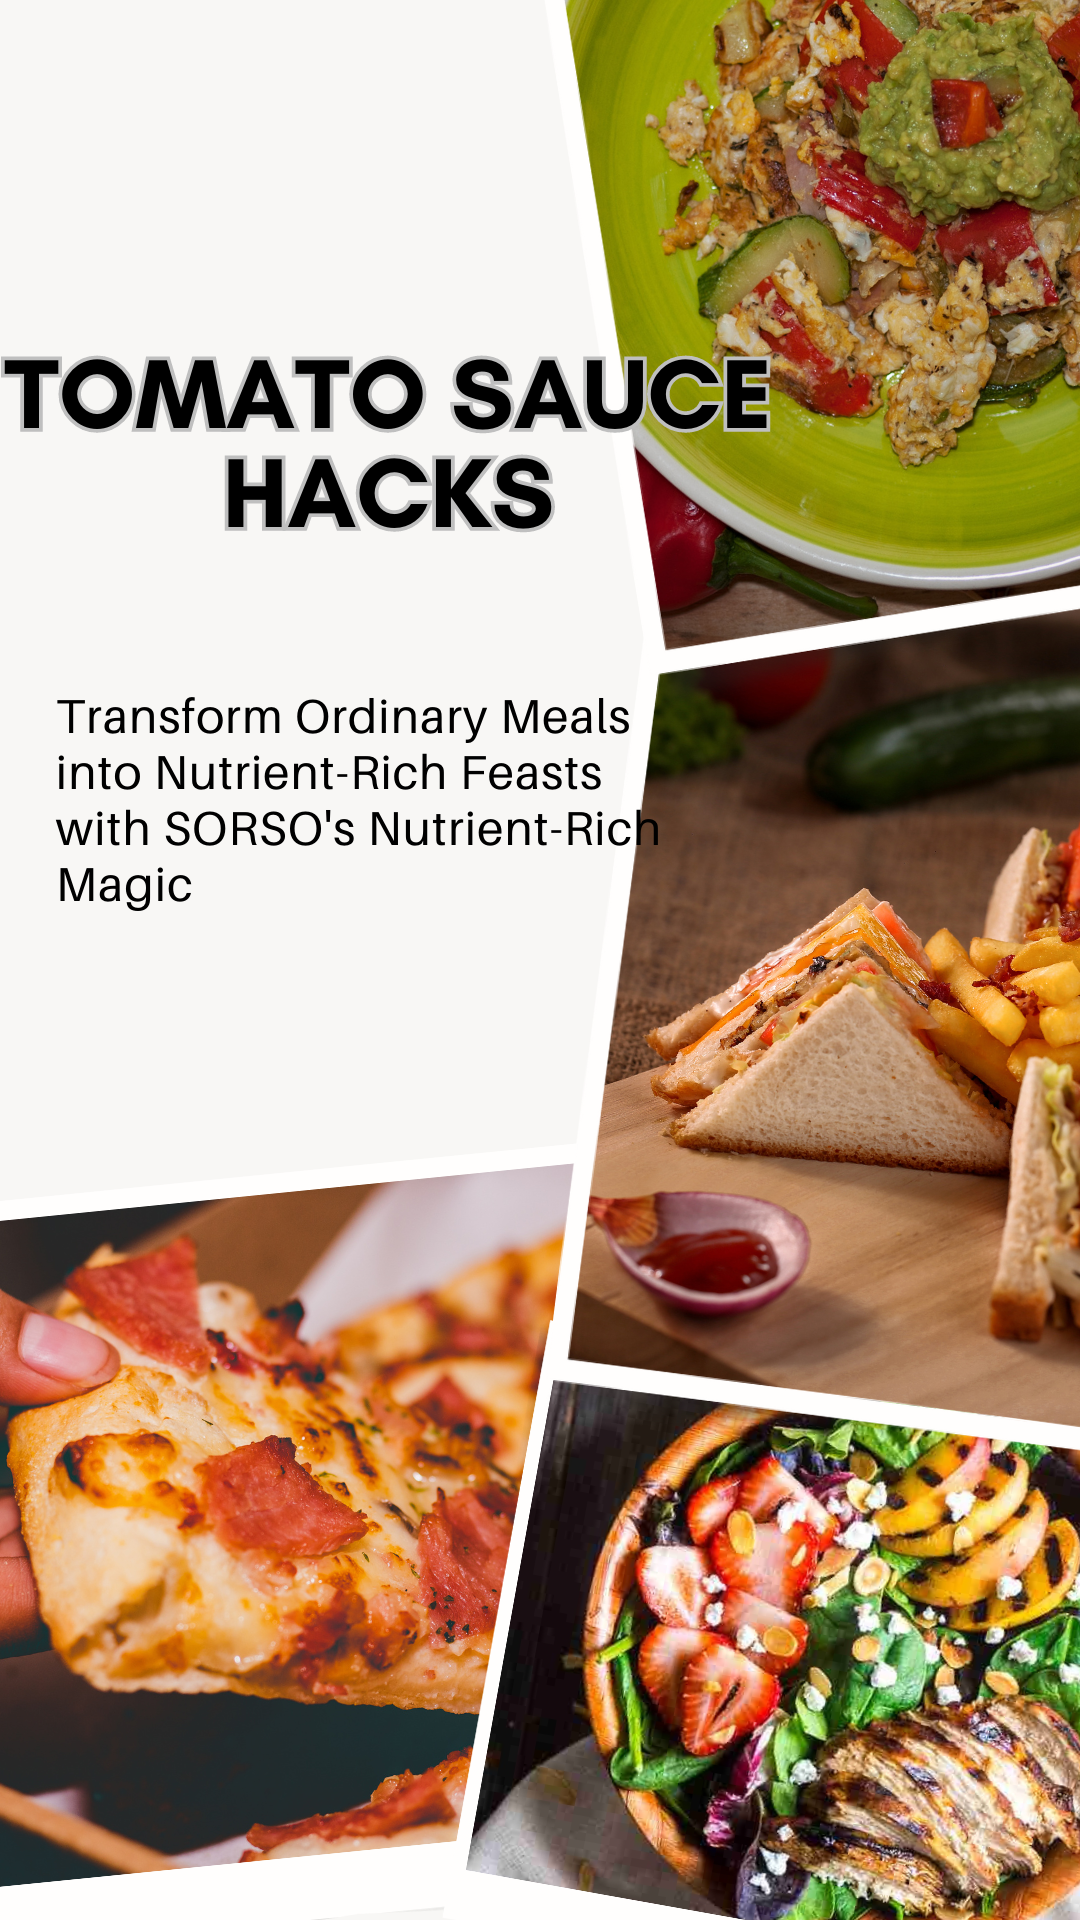 Tomato Sauce Hacks: Elevating Ordinary Meals into Nutrient-Rich Feasts!